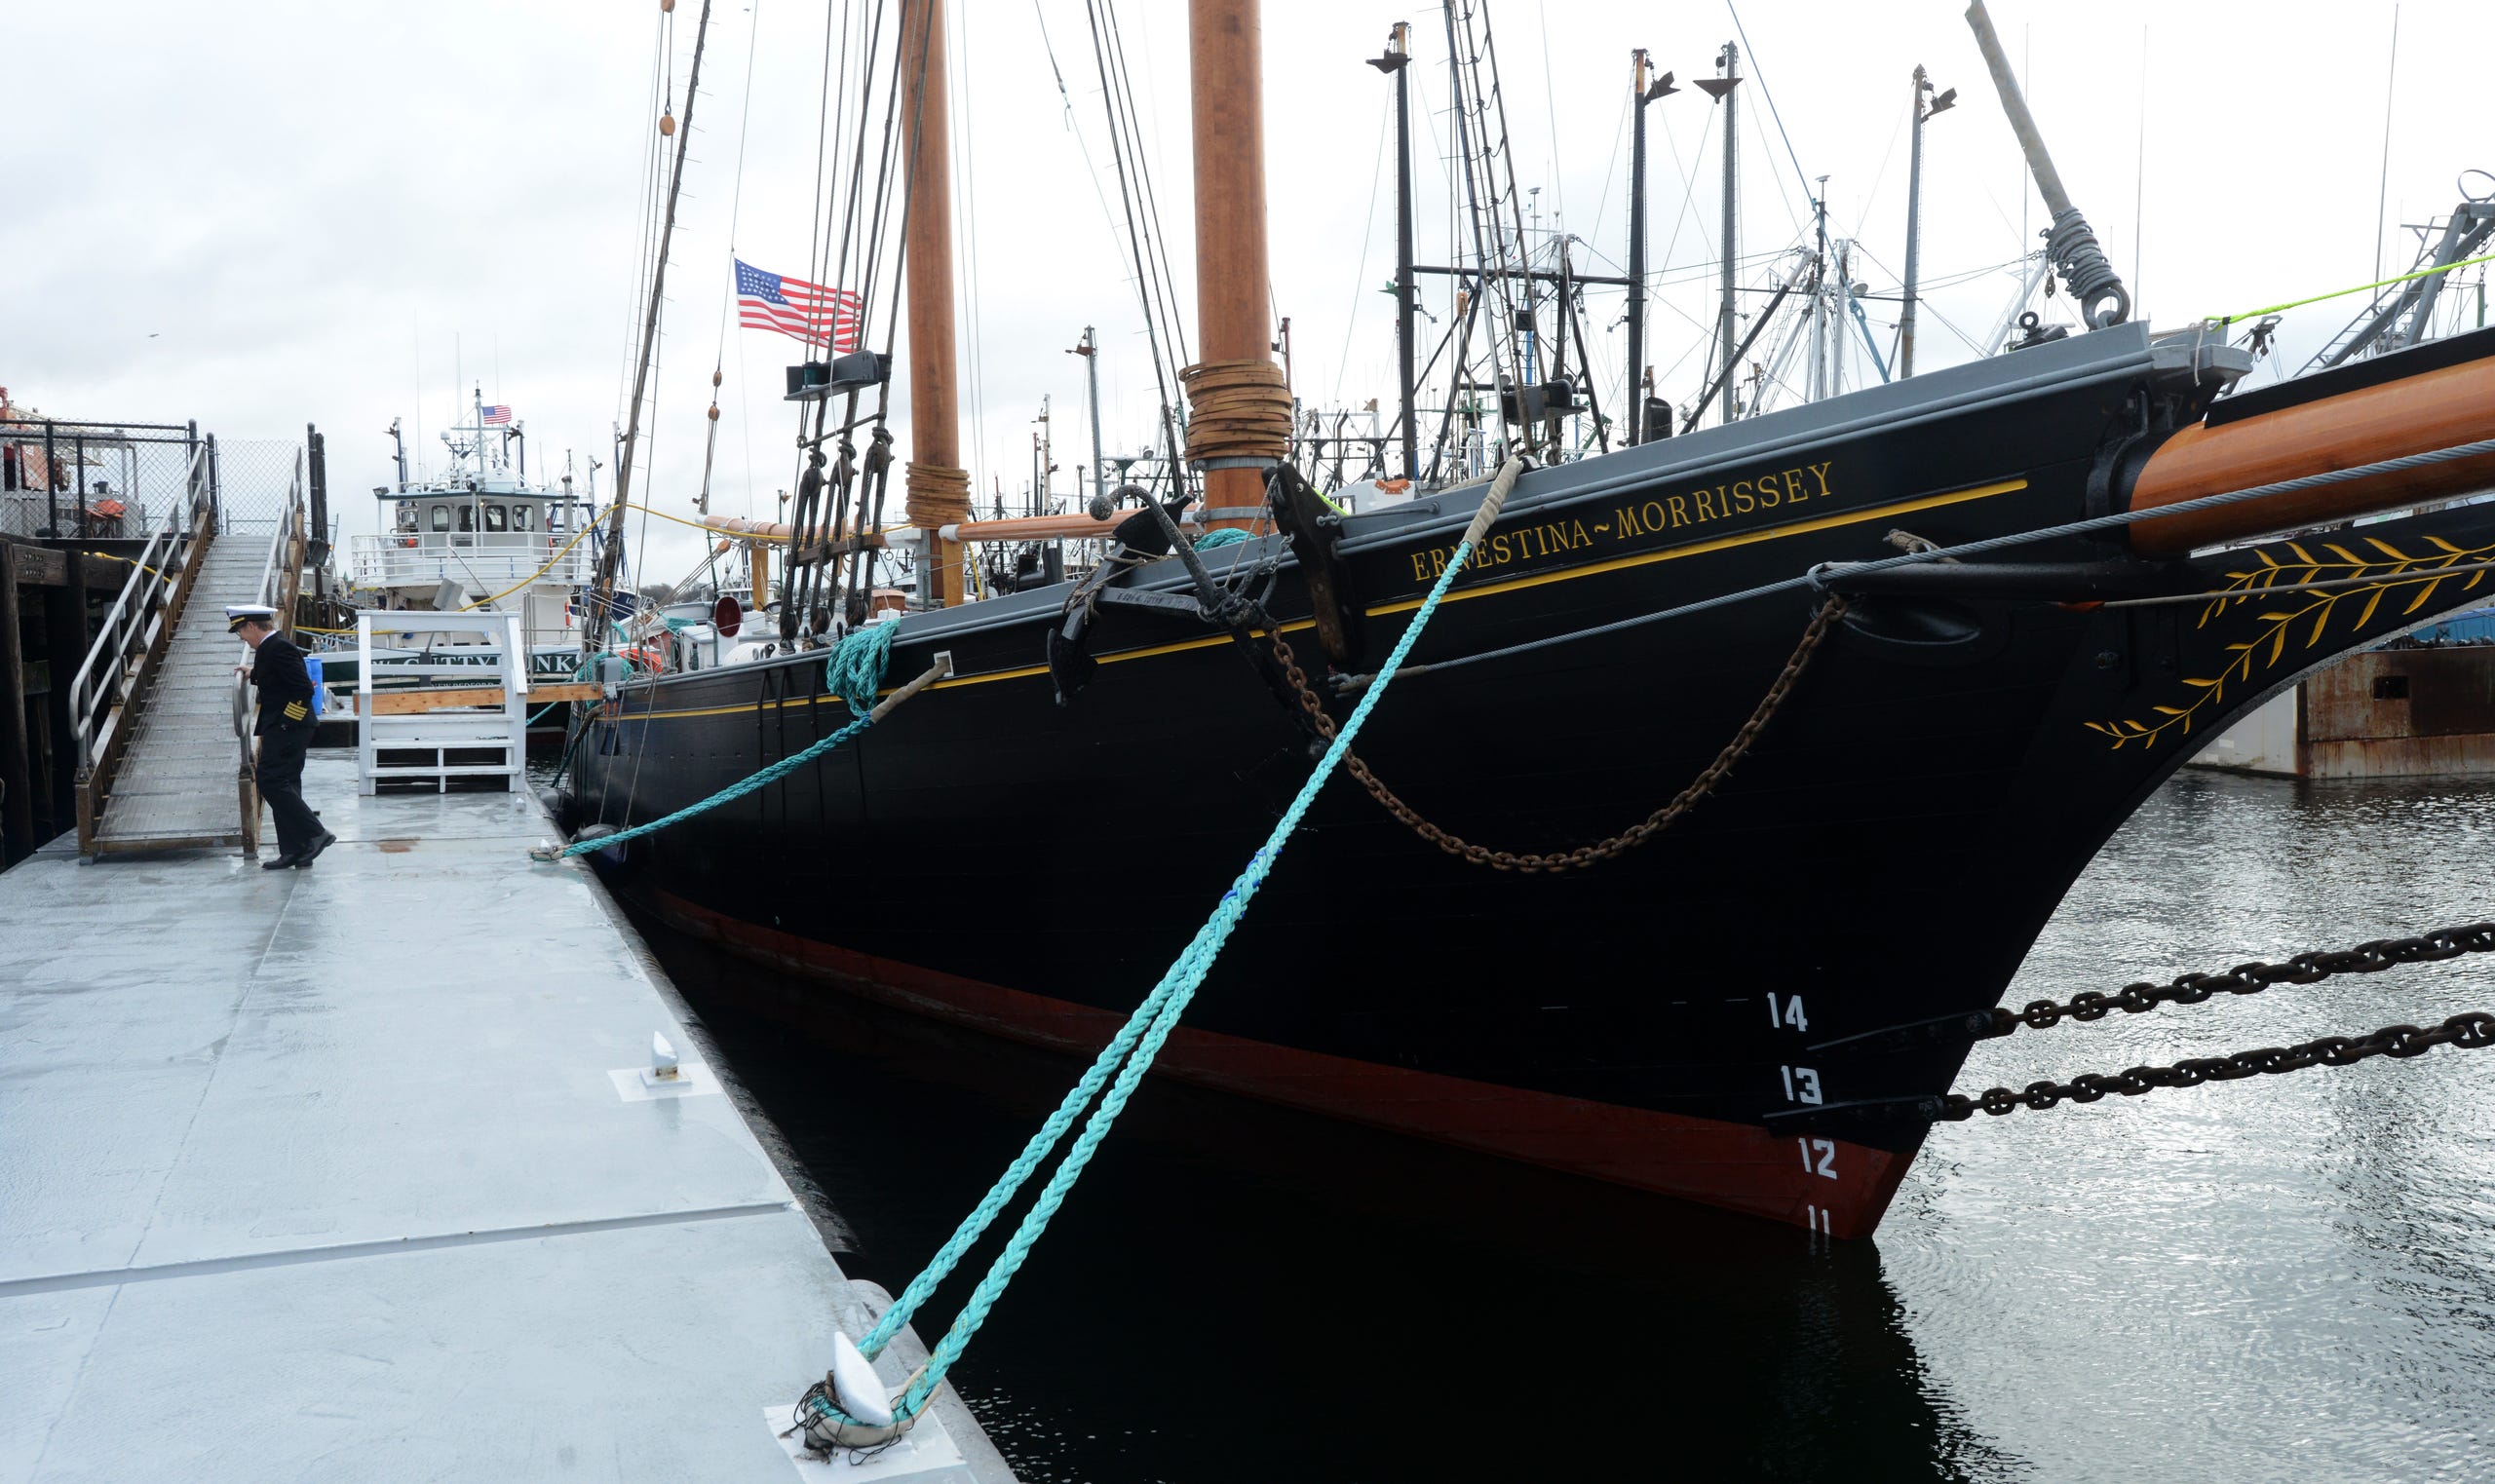 NEW BEDFORD 12/17/22 Captain Tiffany Krihwan, left, heads up the gangway beside the tall ship Ernestina-Morrissey during a homecoming celebration for the tall ship at the State Pier in New Bedford on Saturday. Steve Heaslip/Cape Cod Times